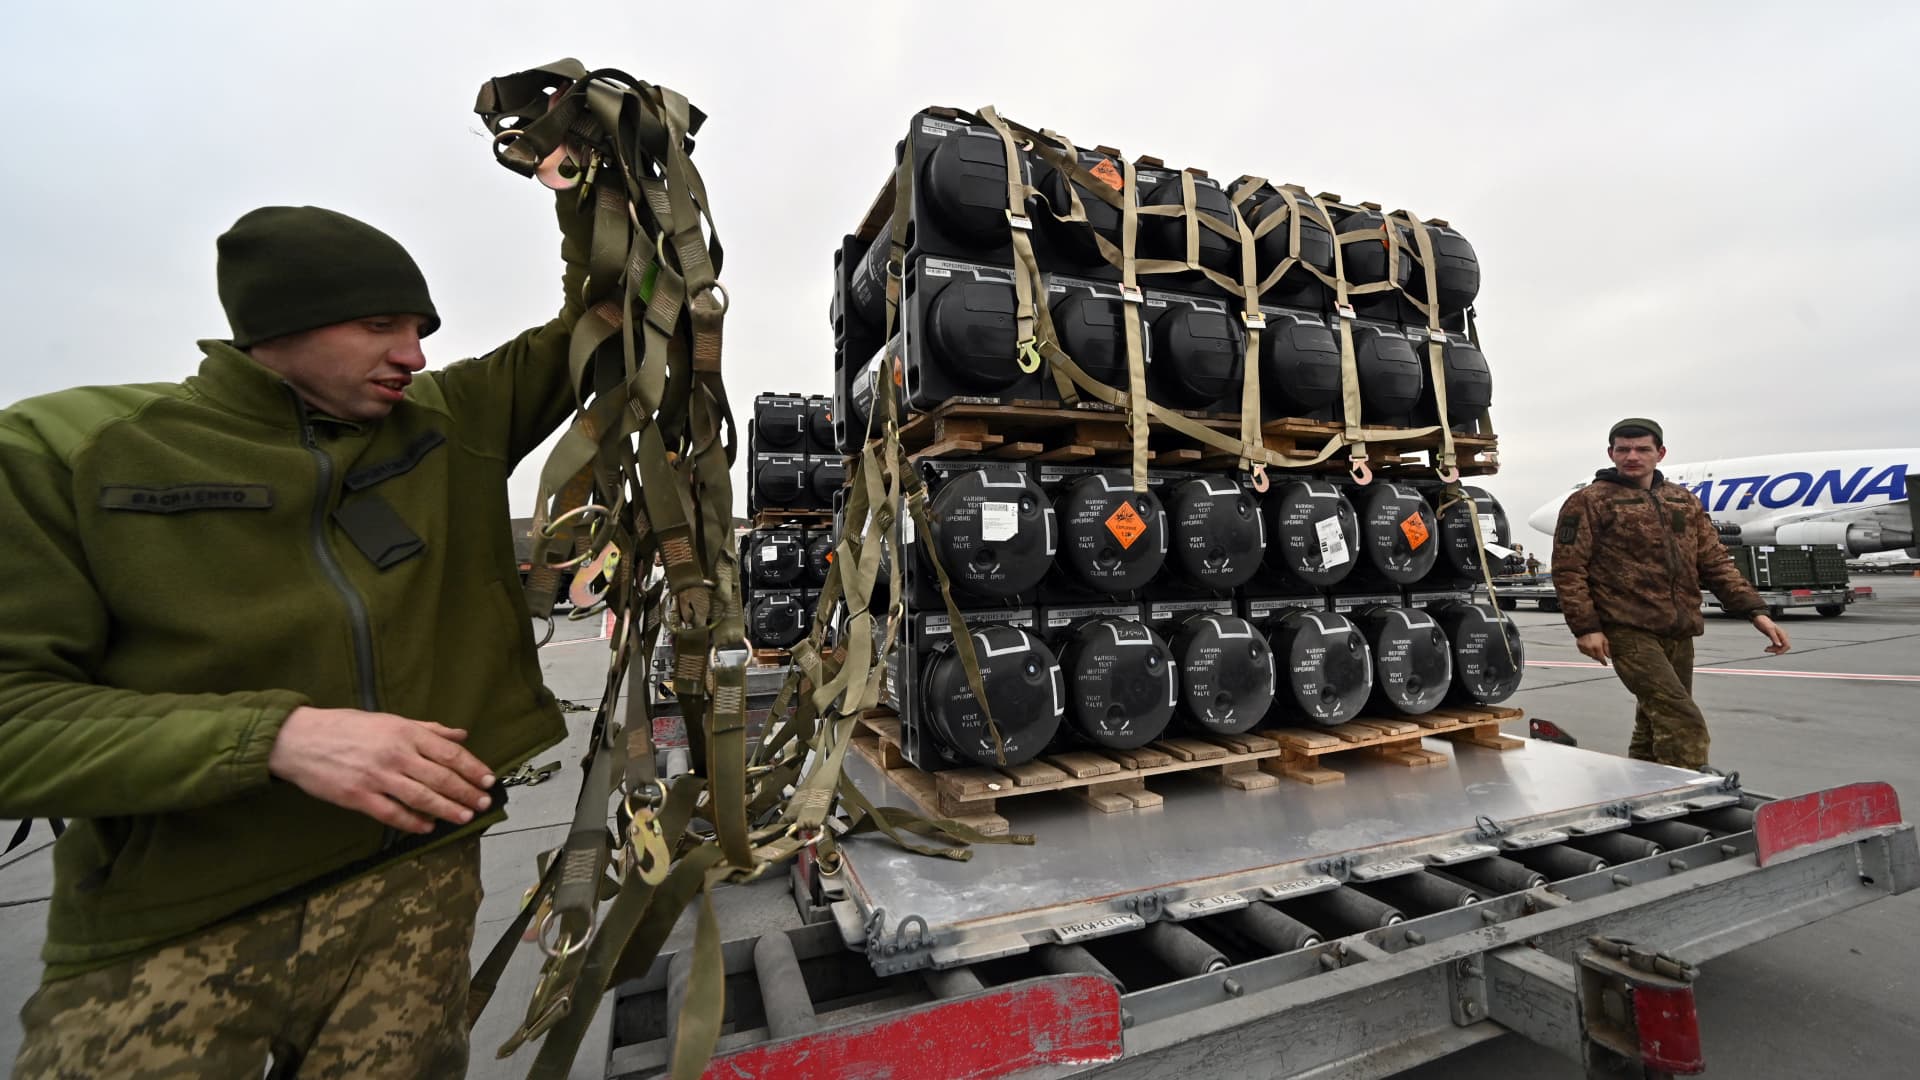 Ukrainian servicemen unload missiles provided by U.S. to Ukraine as part of a military support on Feb. 11, 2022. The U.S. has committed more than $4.5 billion on security assistance to Ukraine since the beginning of the Biden Administration.